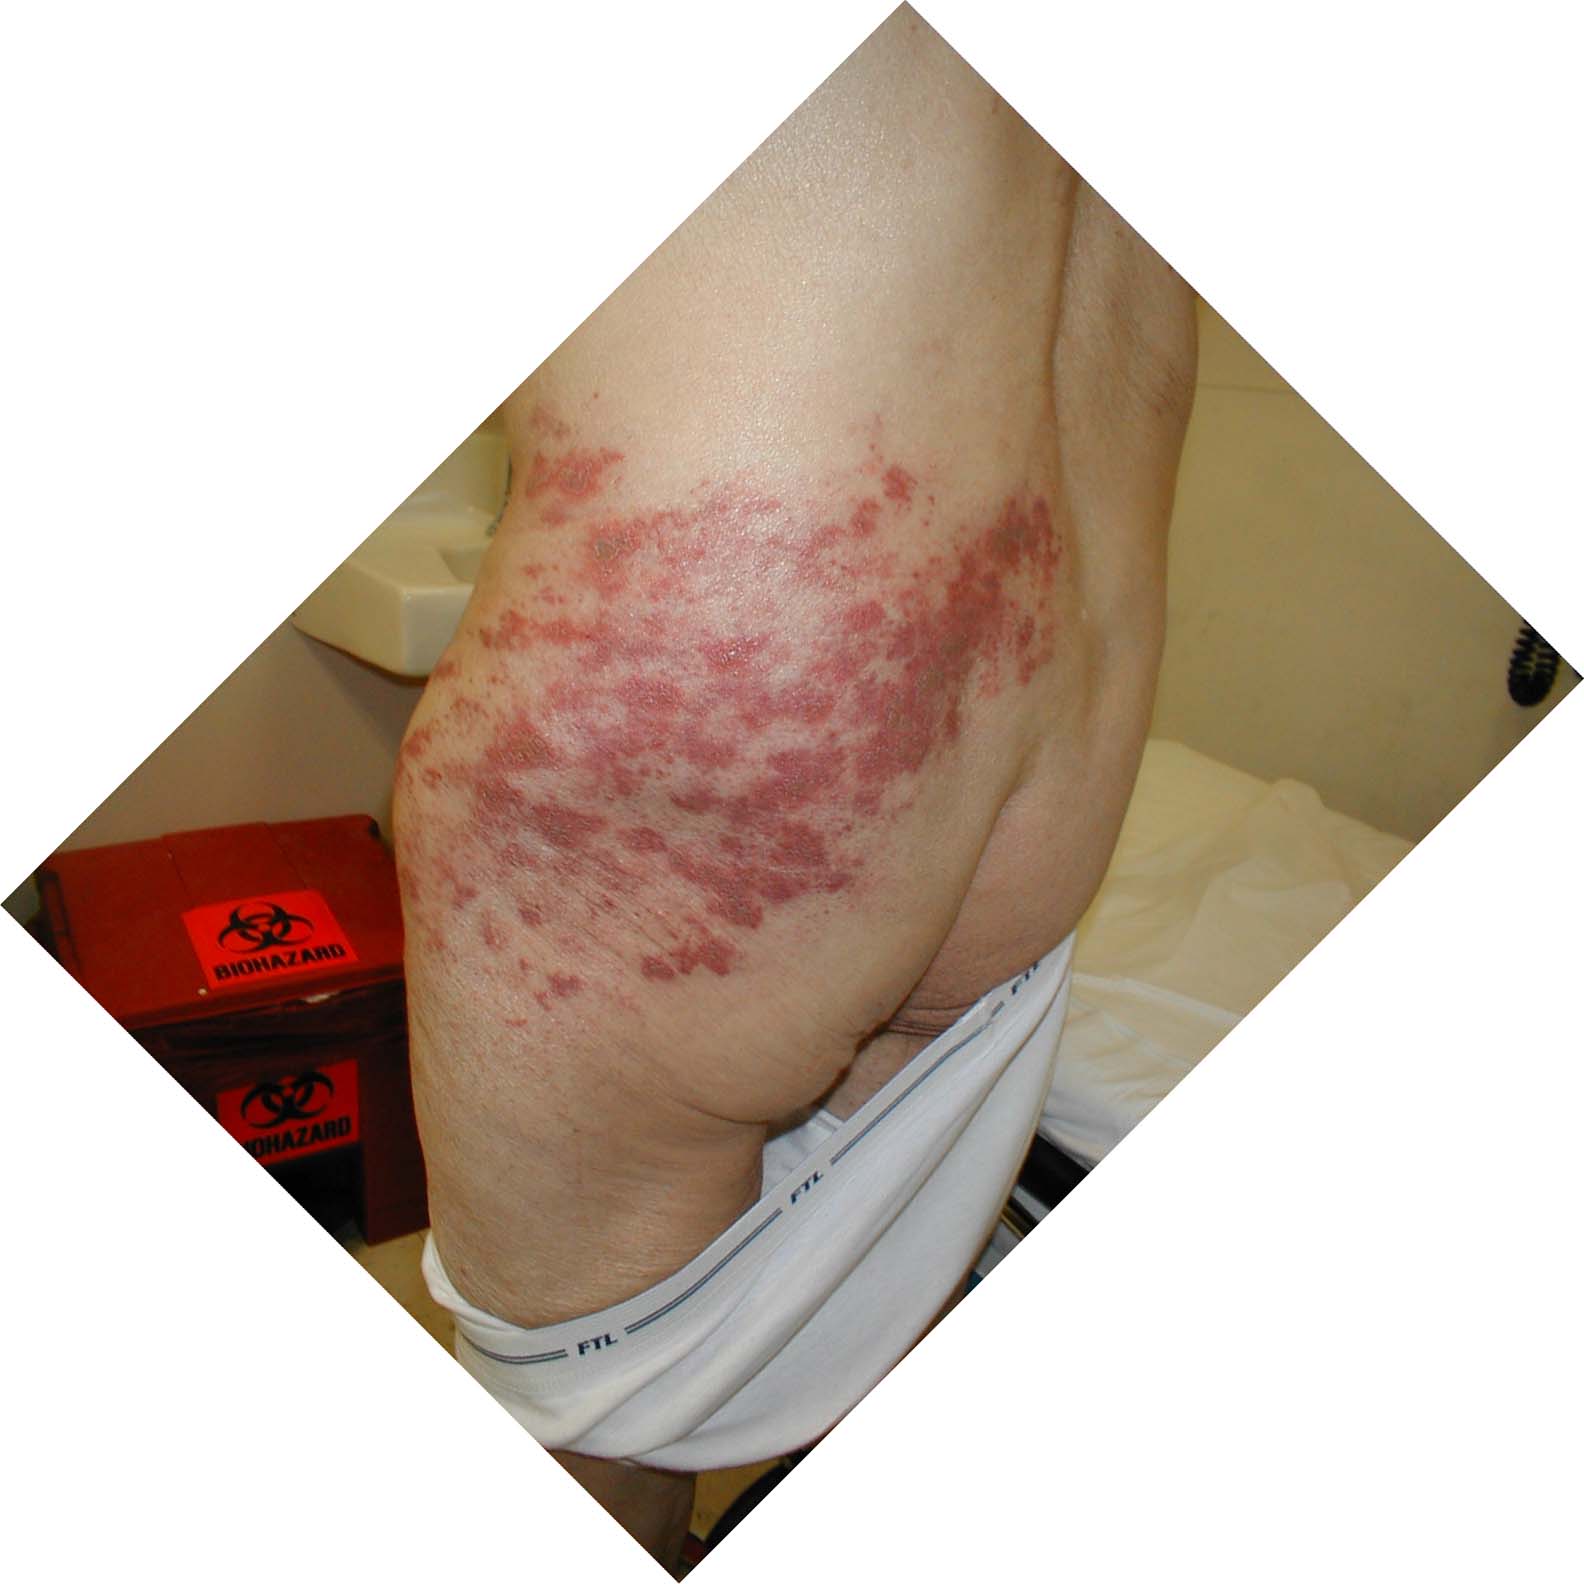 Herpes Zoster: Dermatomally distributed vesicles, many of which have coalesced, in patient with HZV infection.